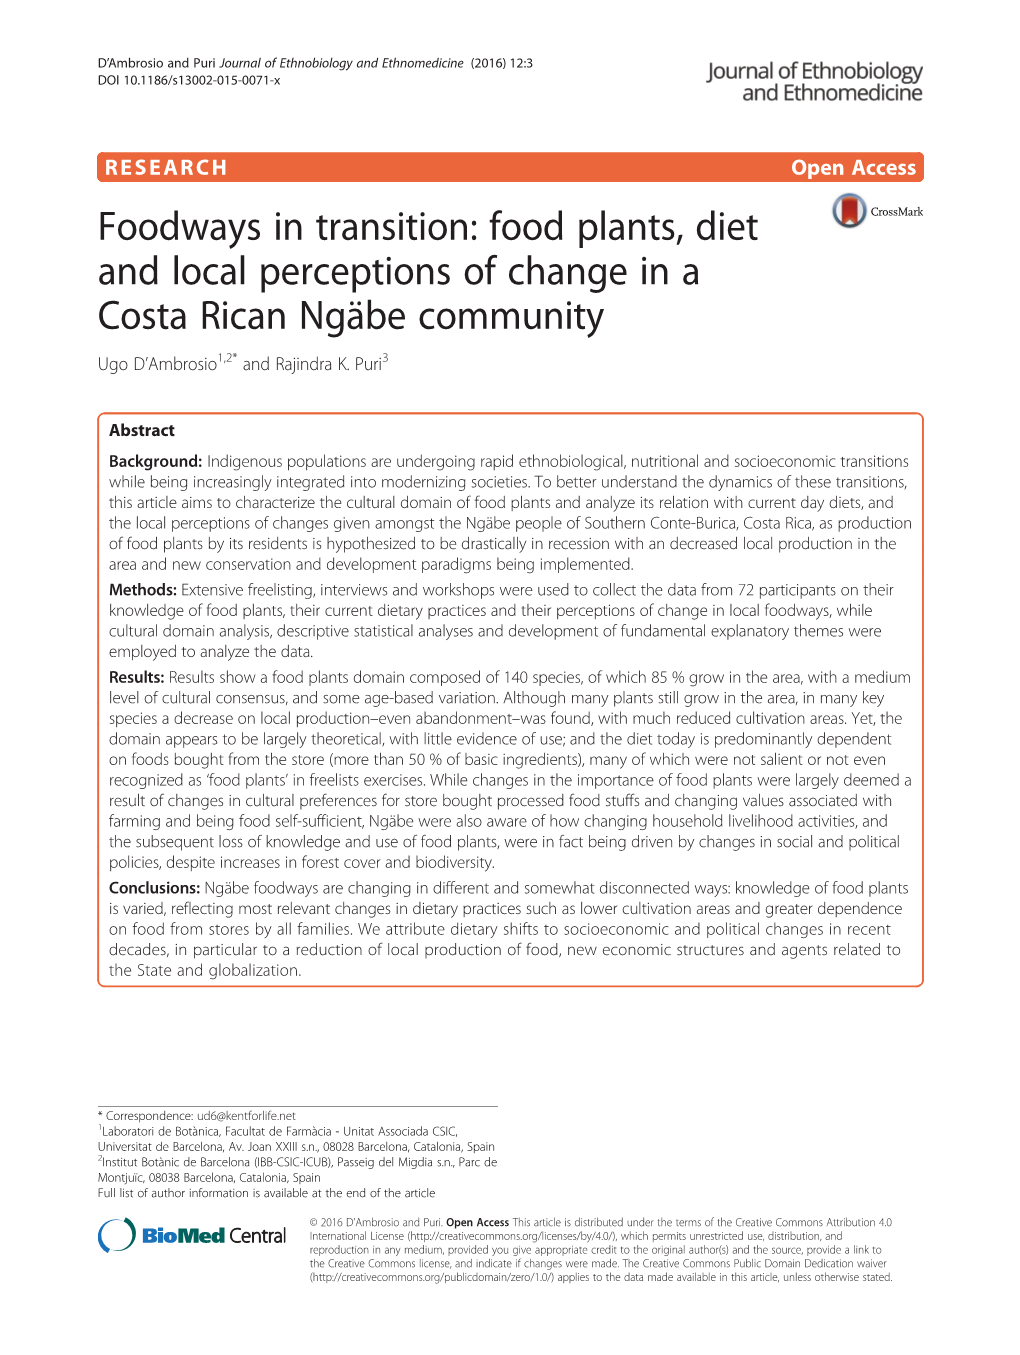 Food Plants, Diet and Local Perceptions of Change in a Costa Rican Ngäbe Community Ugo D’Ambrosio1,2* and Rajindra K